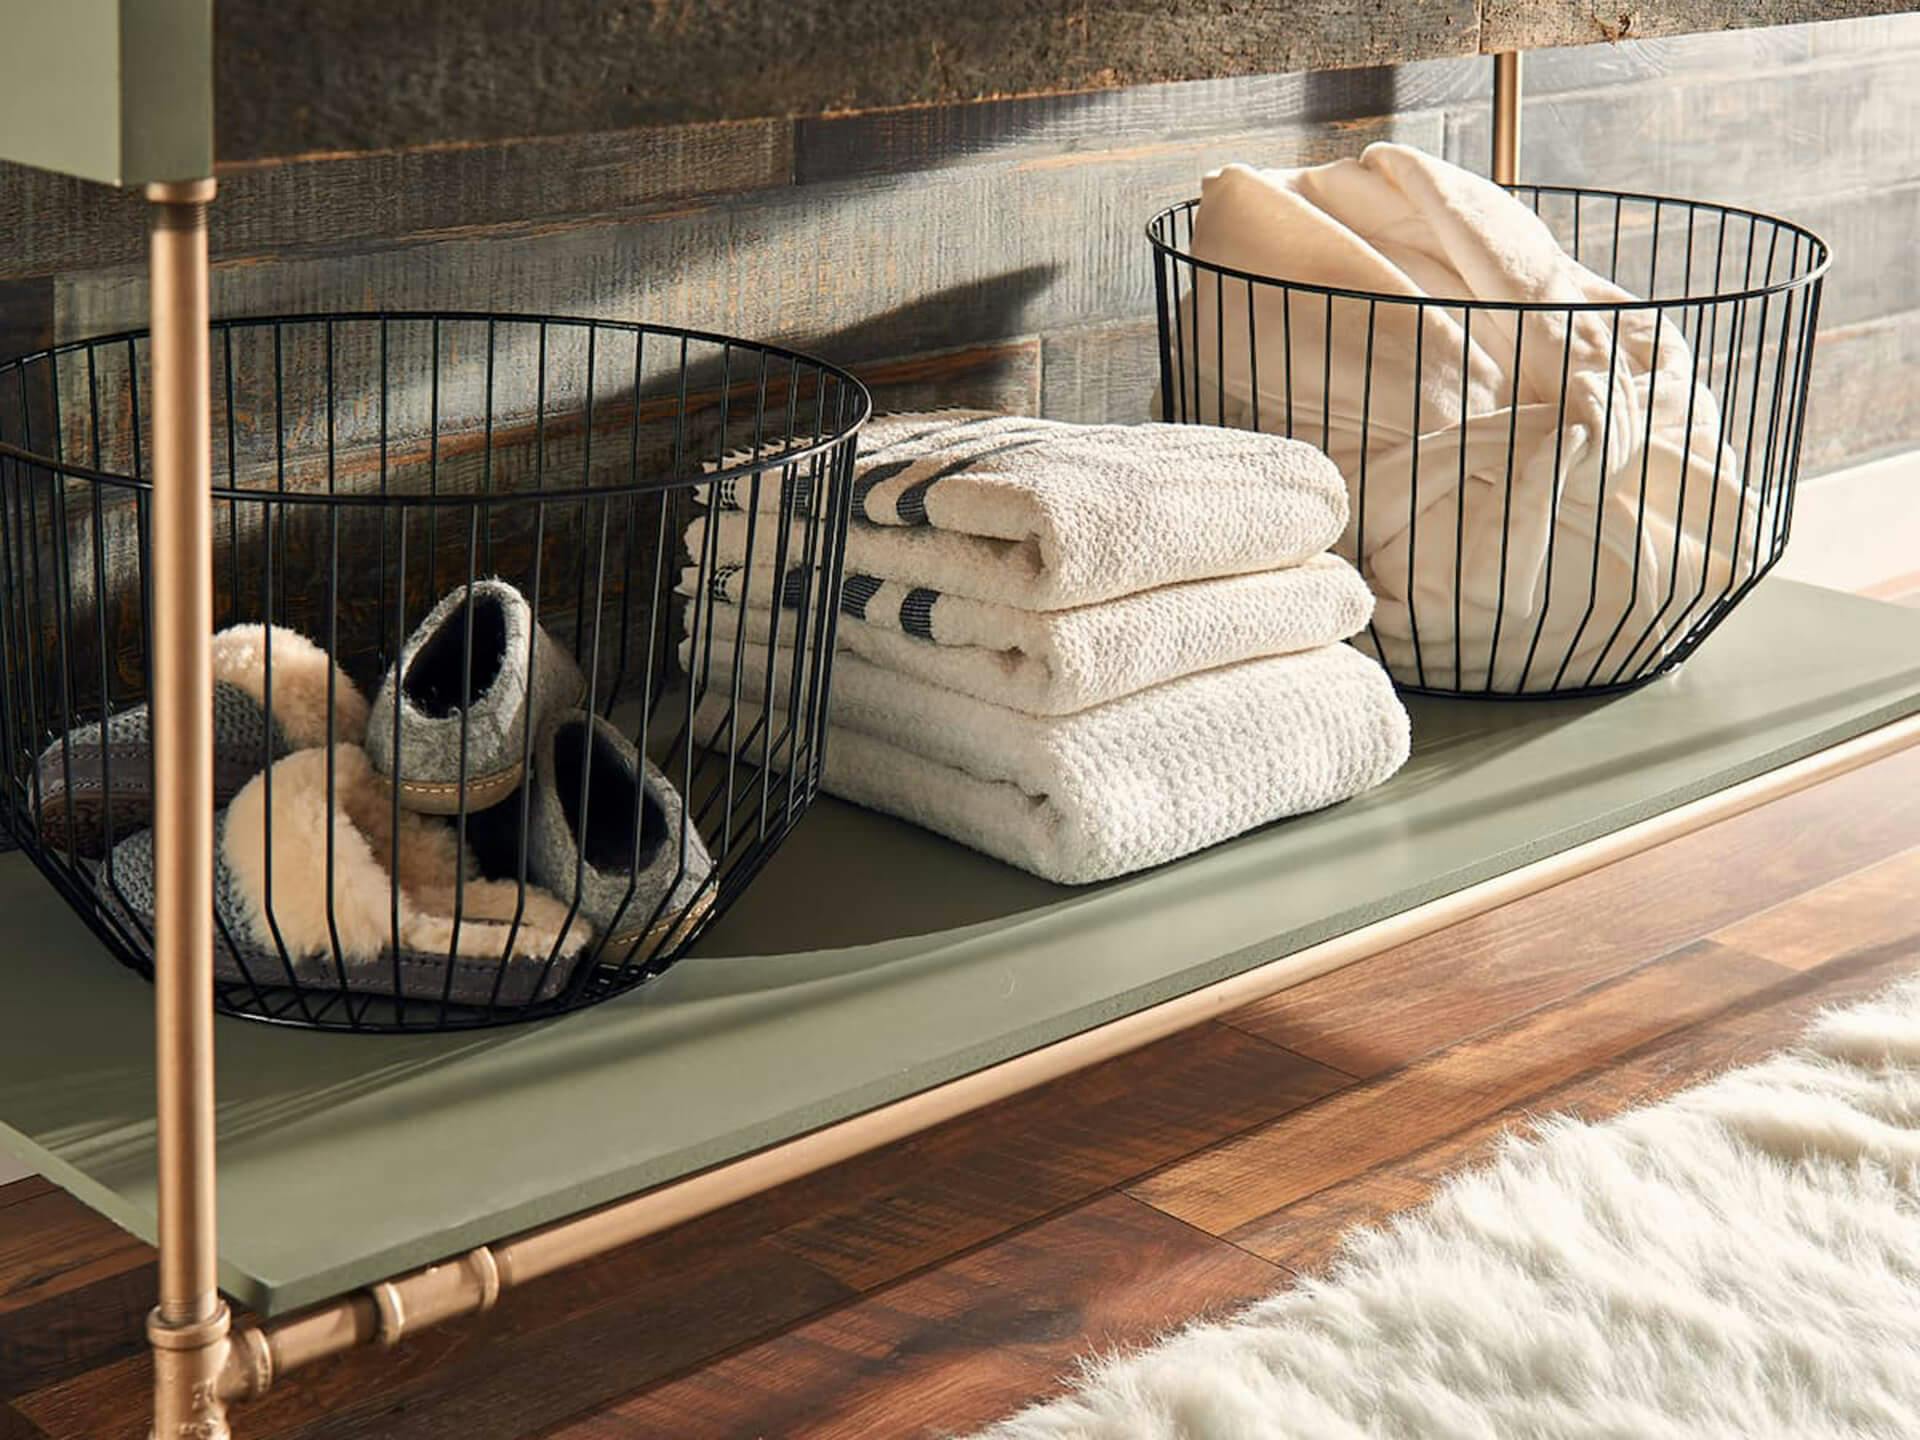 Close up of a green bathroom shelf with towels and baskets